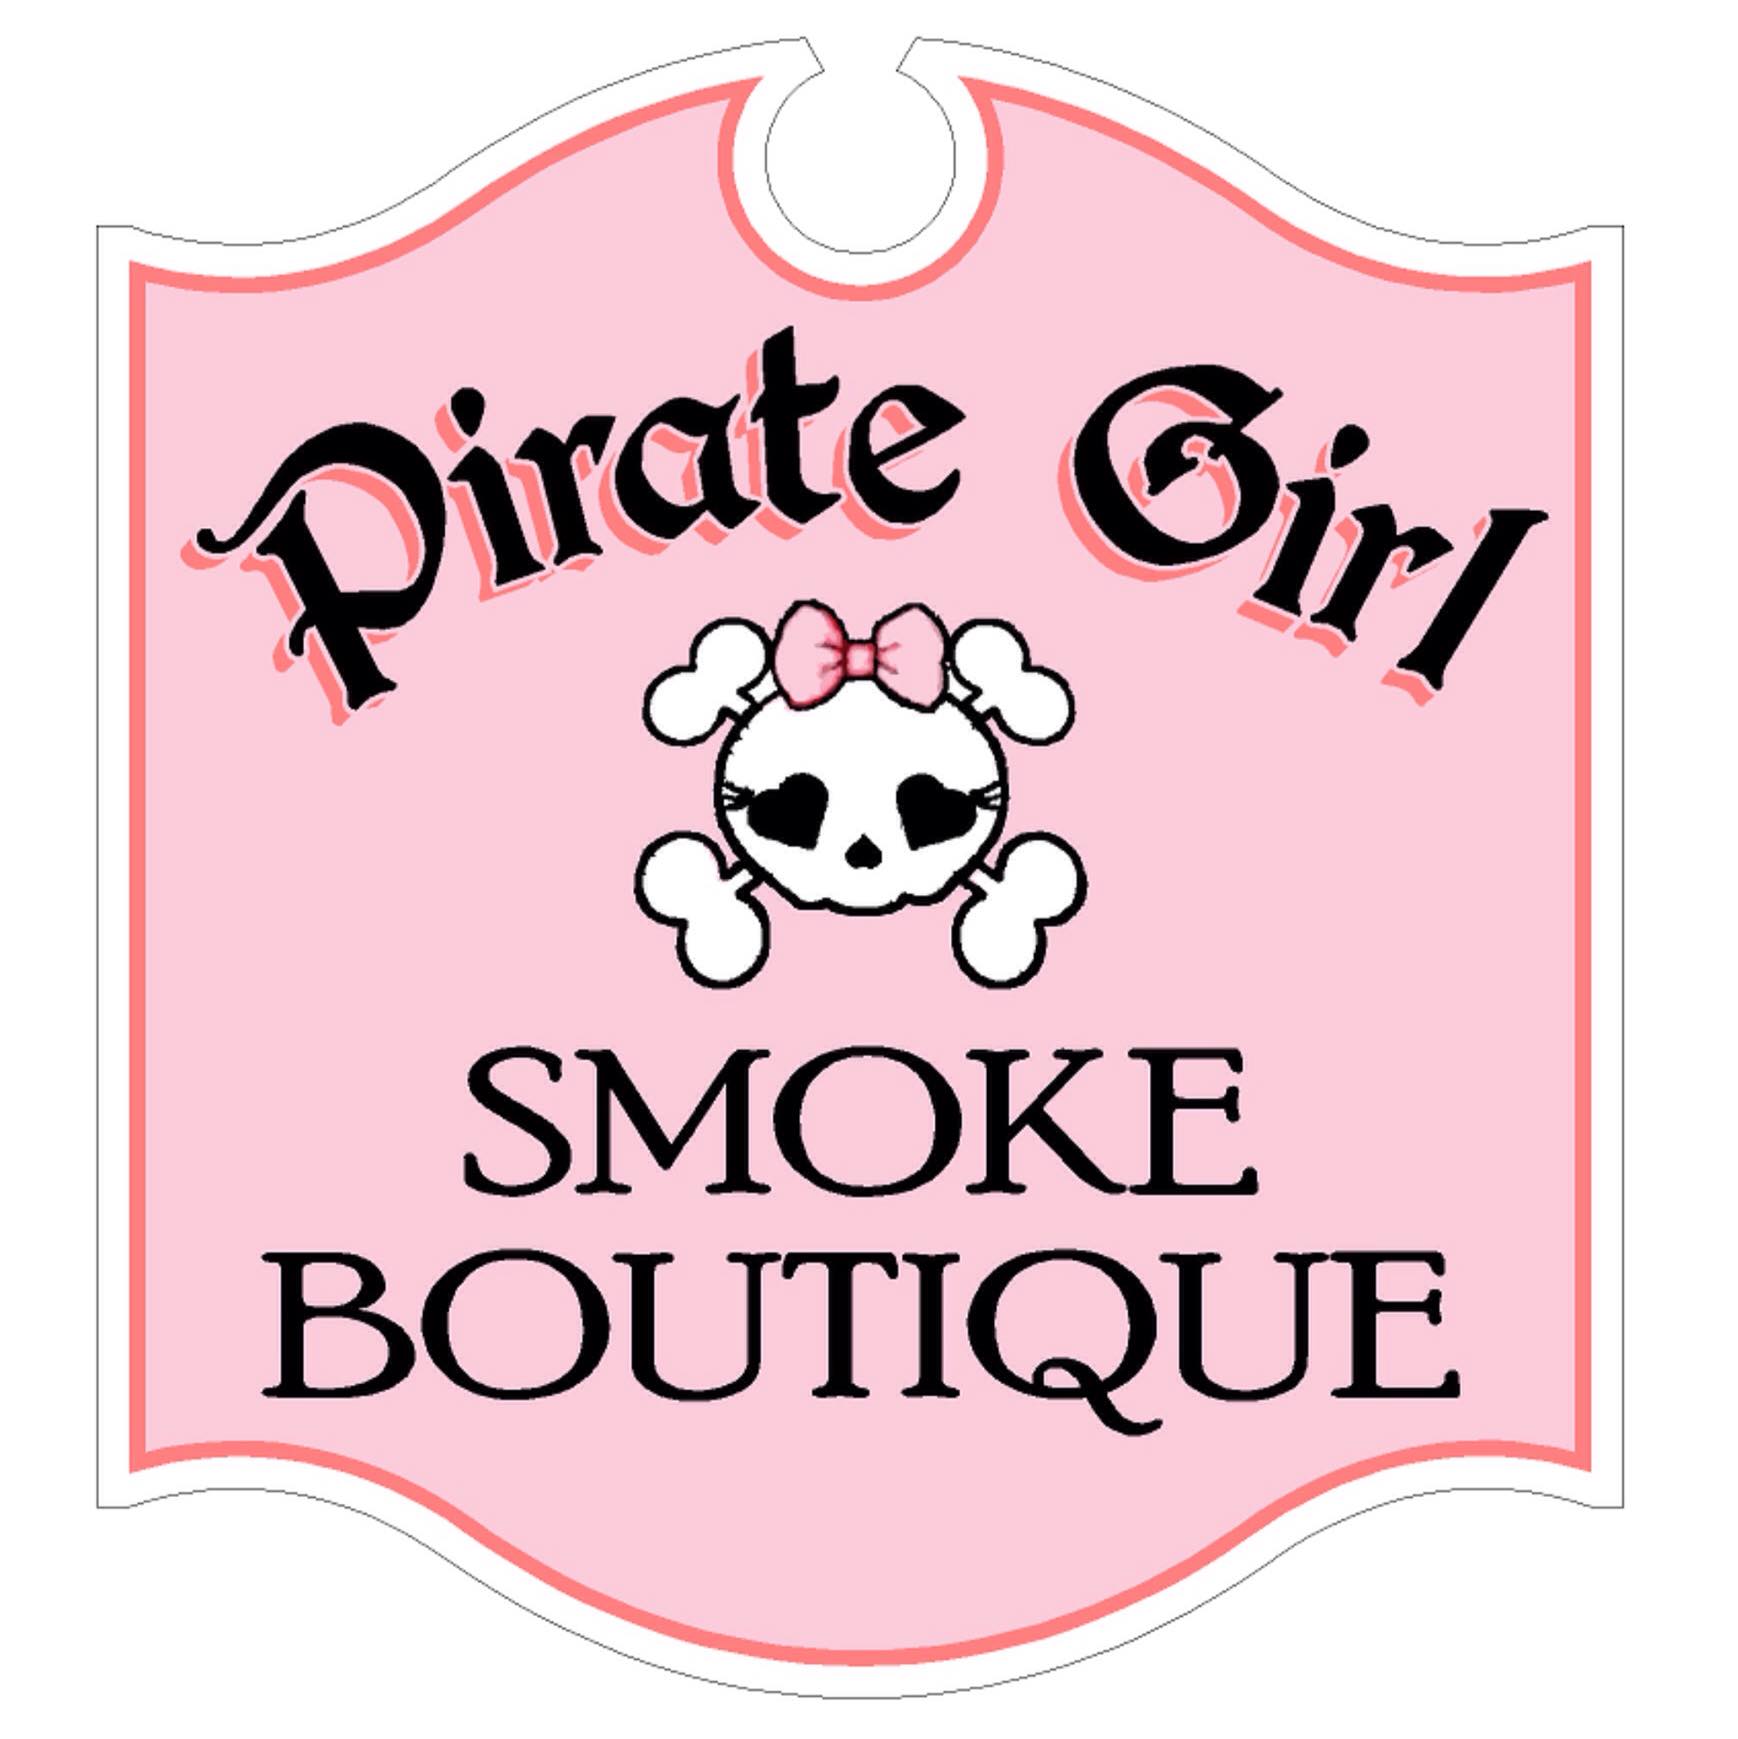 Products – Pirate Girl Smoke Boutique